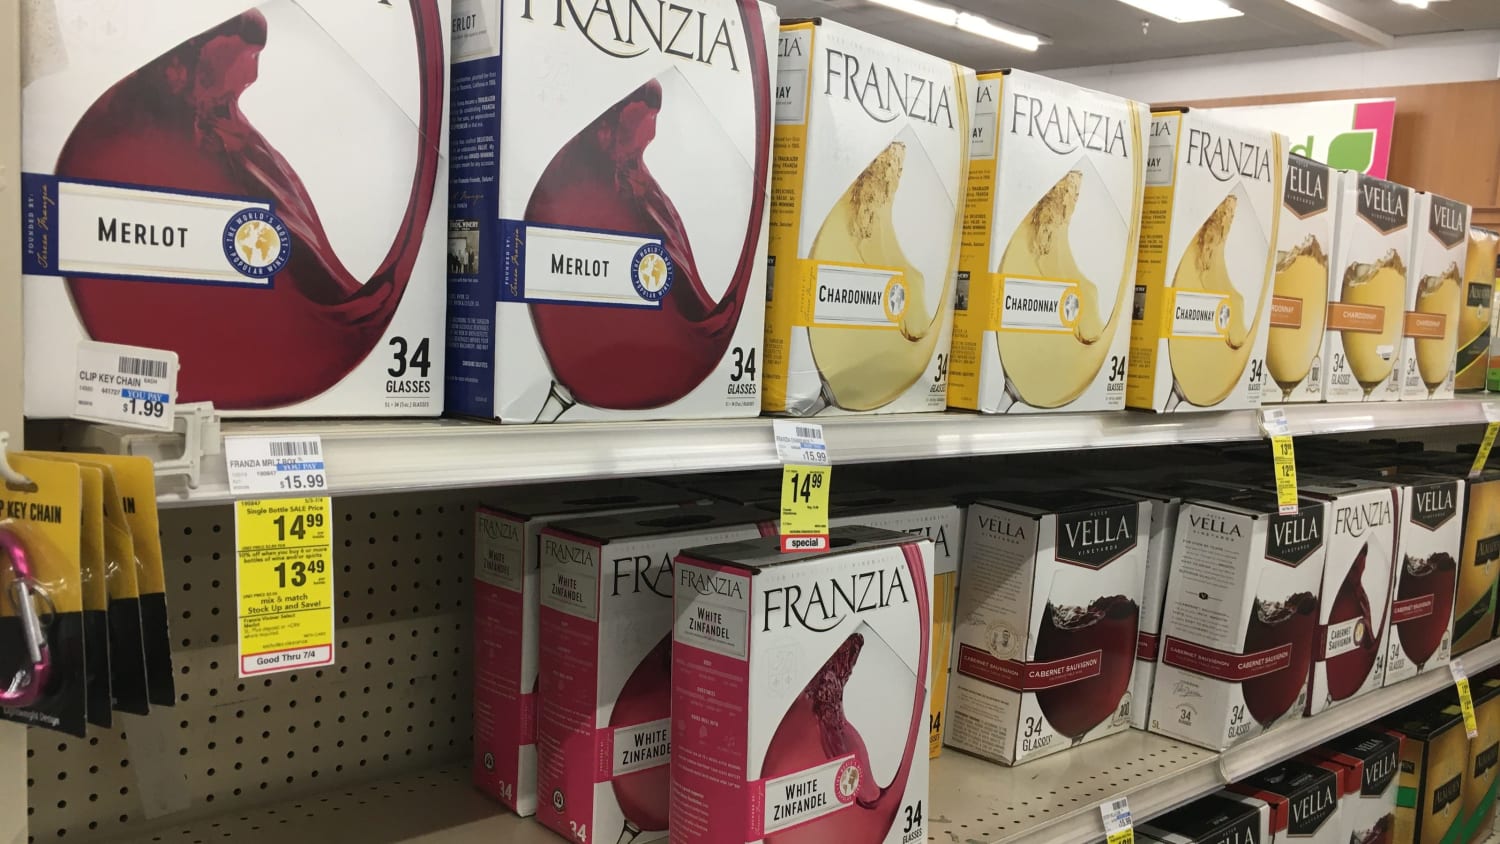 'Don't tell my wine snob friends': Why Americans are buying more boxed wine during COVID-19